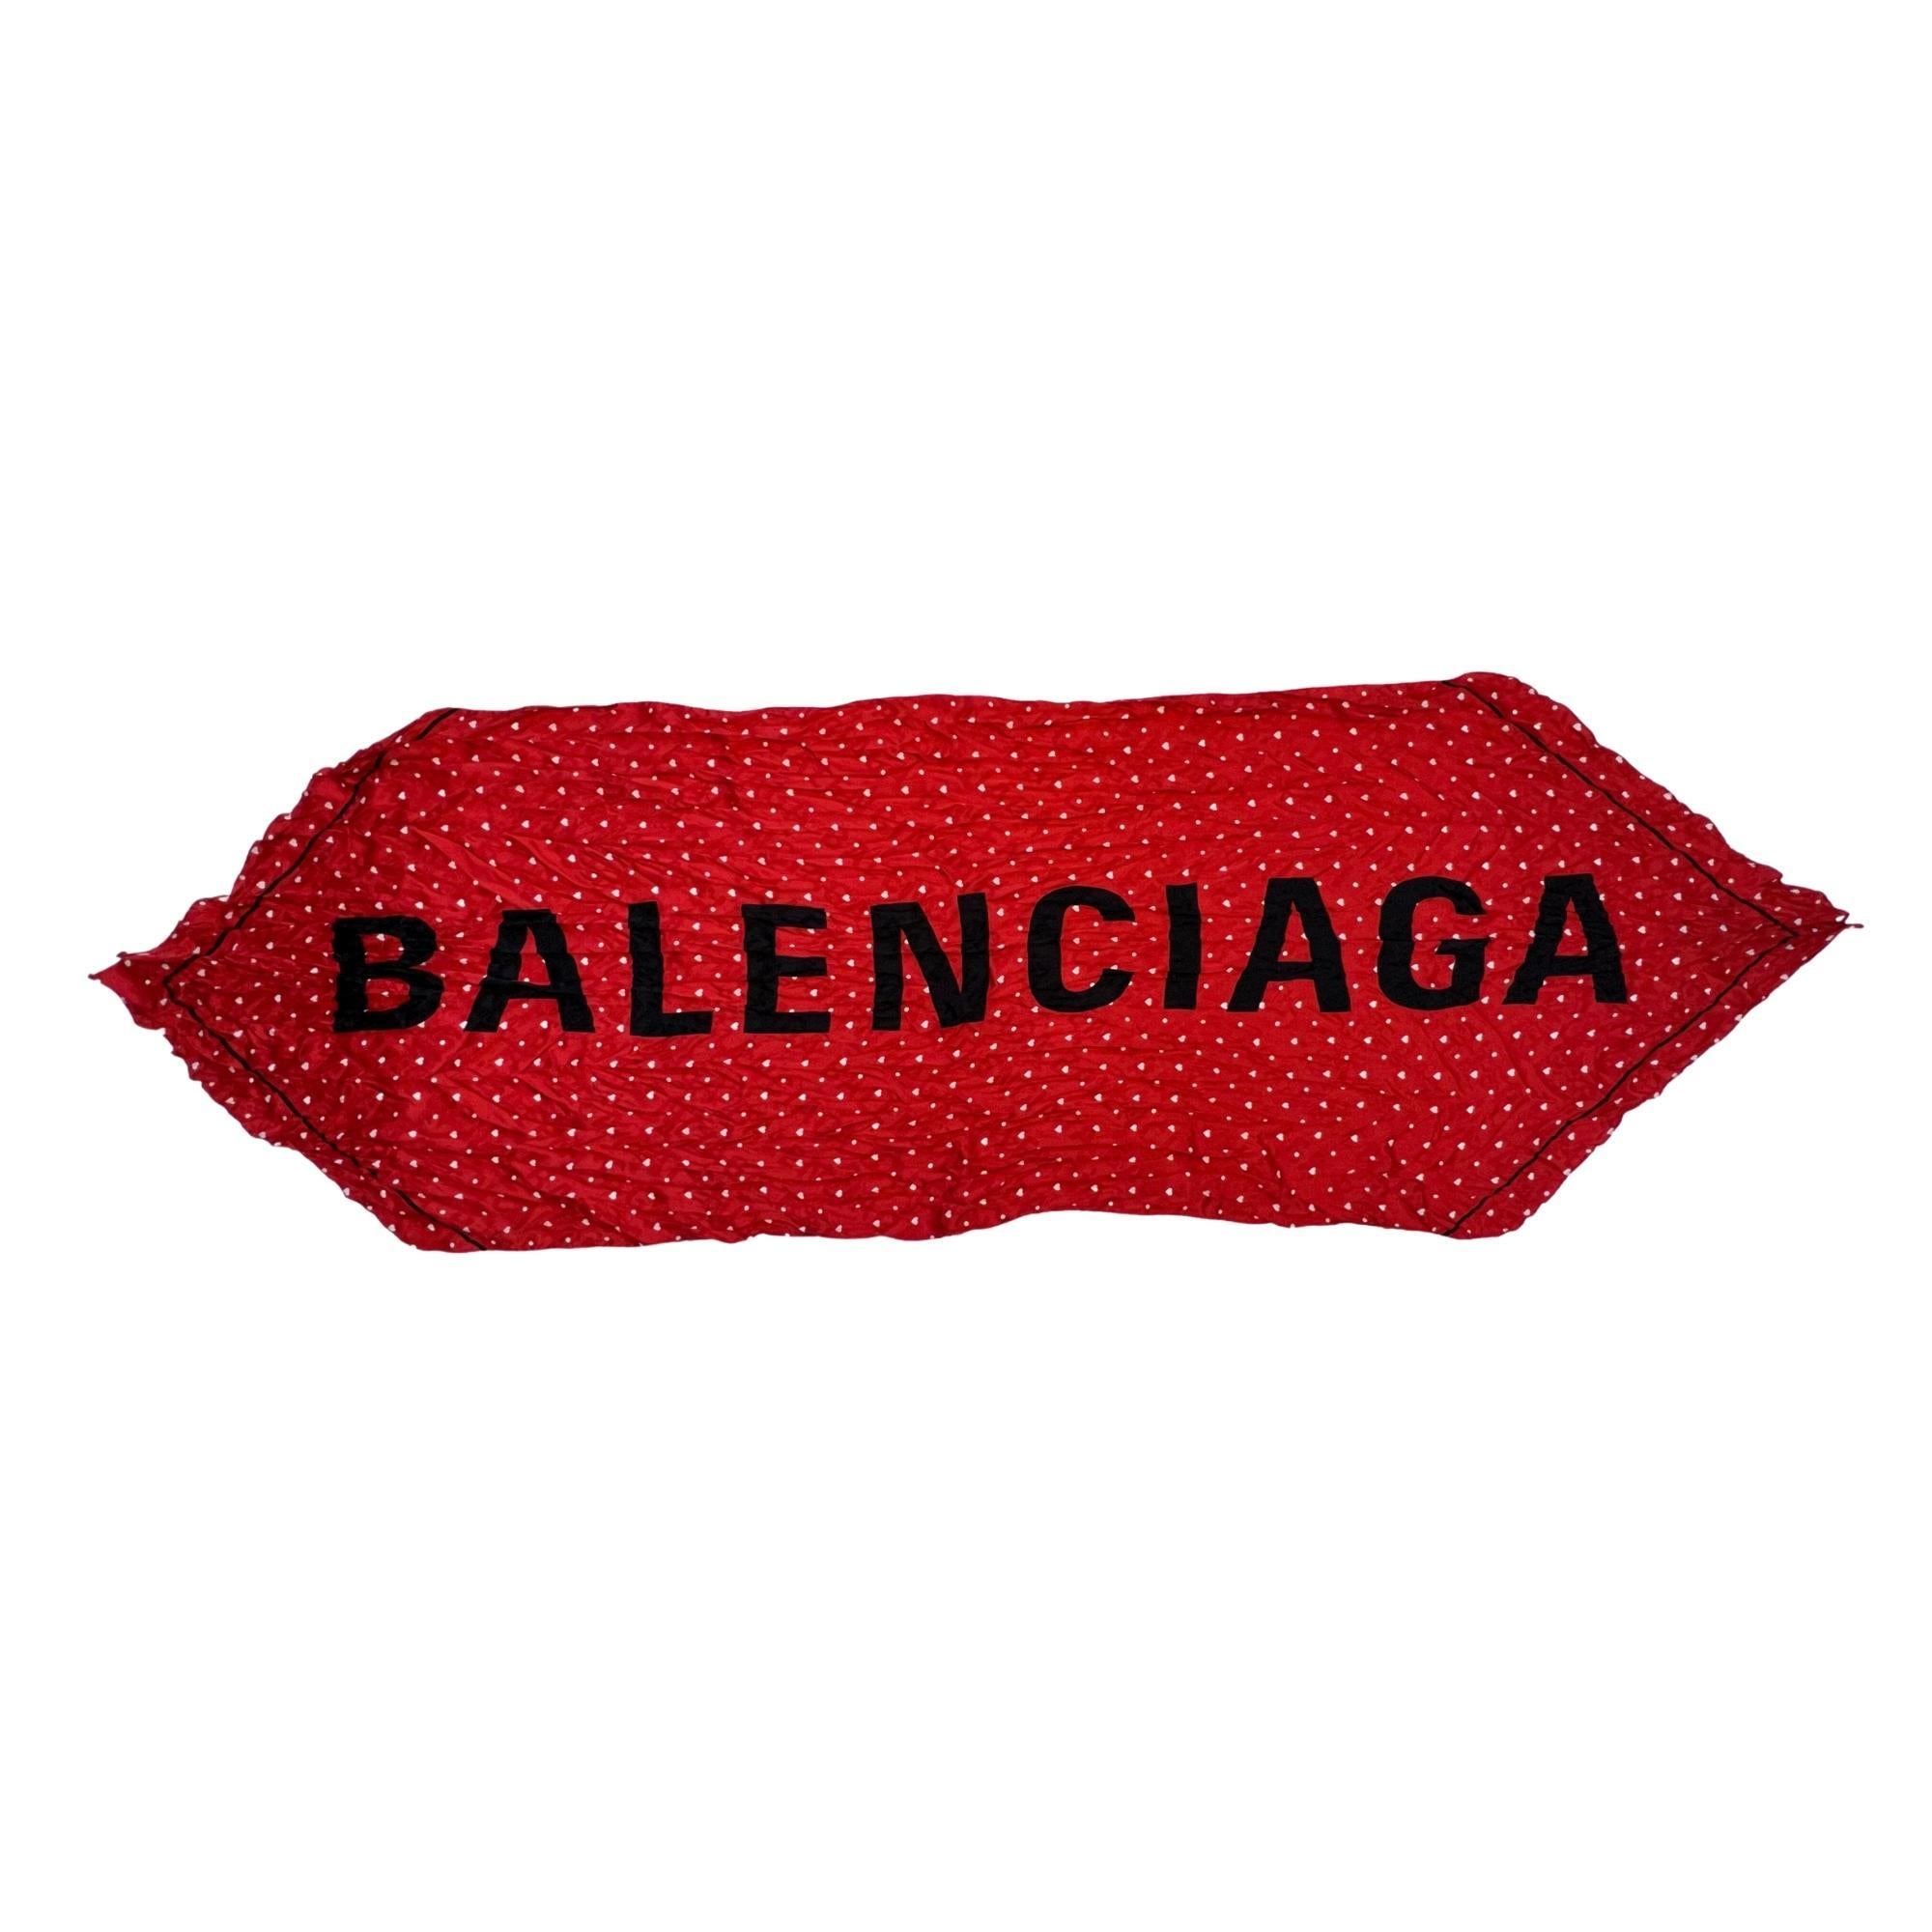 This scarf is made from lightly crinkled silk in red with a vibrant white polka dot jacquard print and the Balenciaga logo in bold black letters. Knot it through your ponytail, the strap of your favorite tote, or in the classic scarf motif to